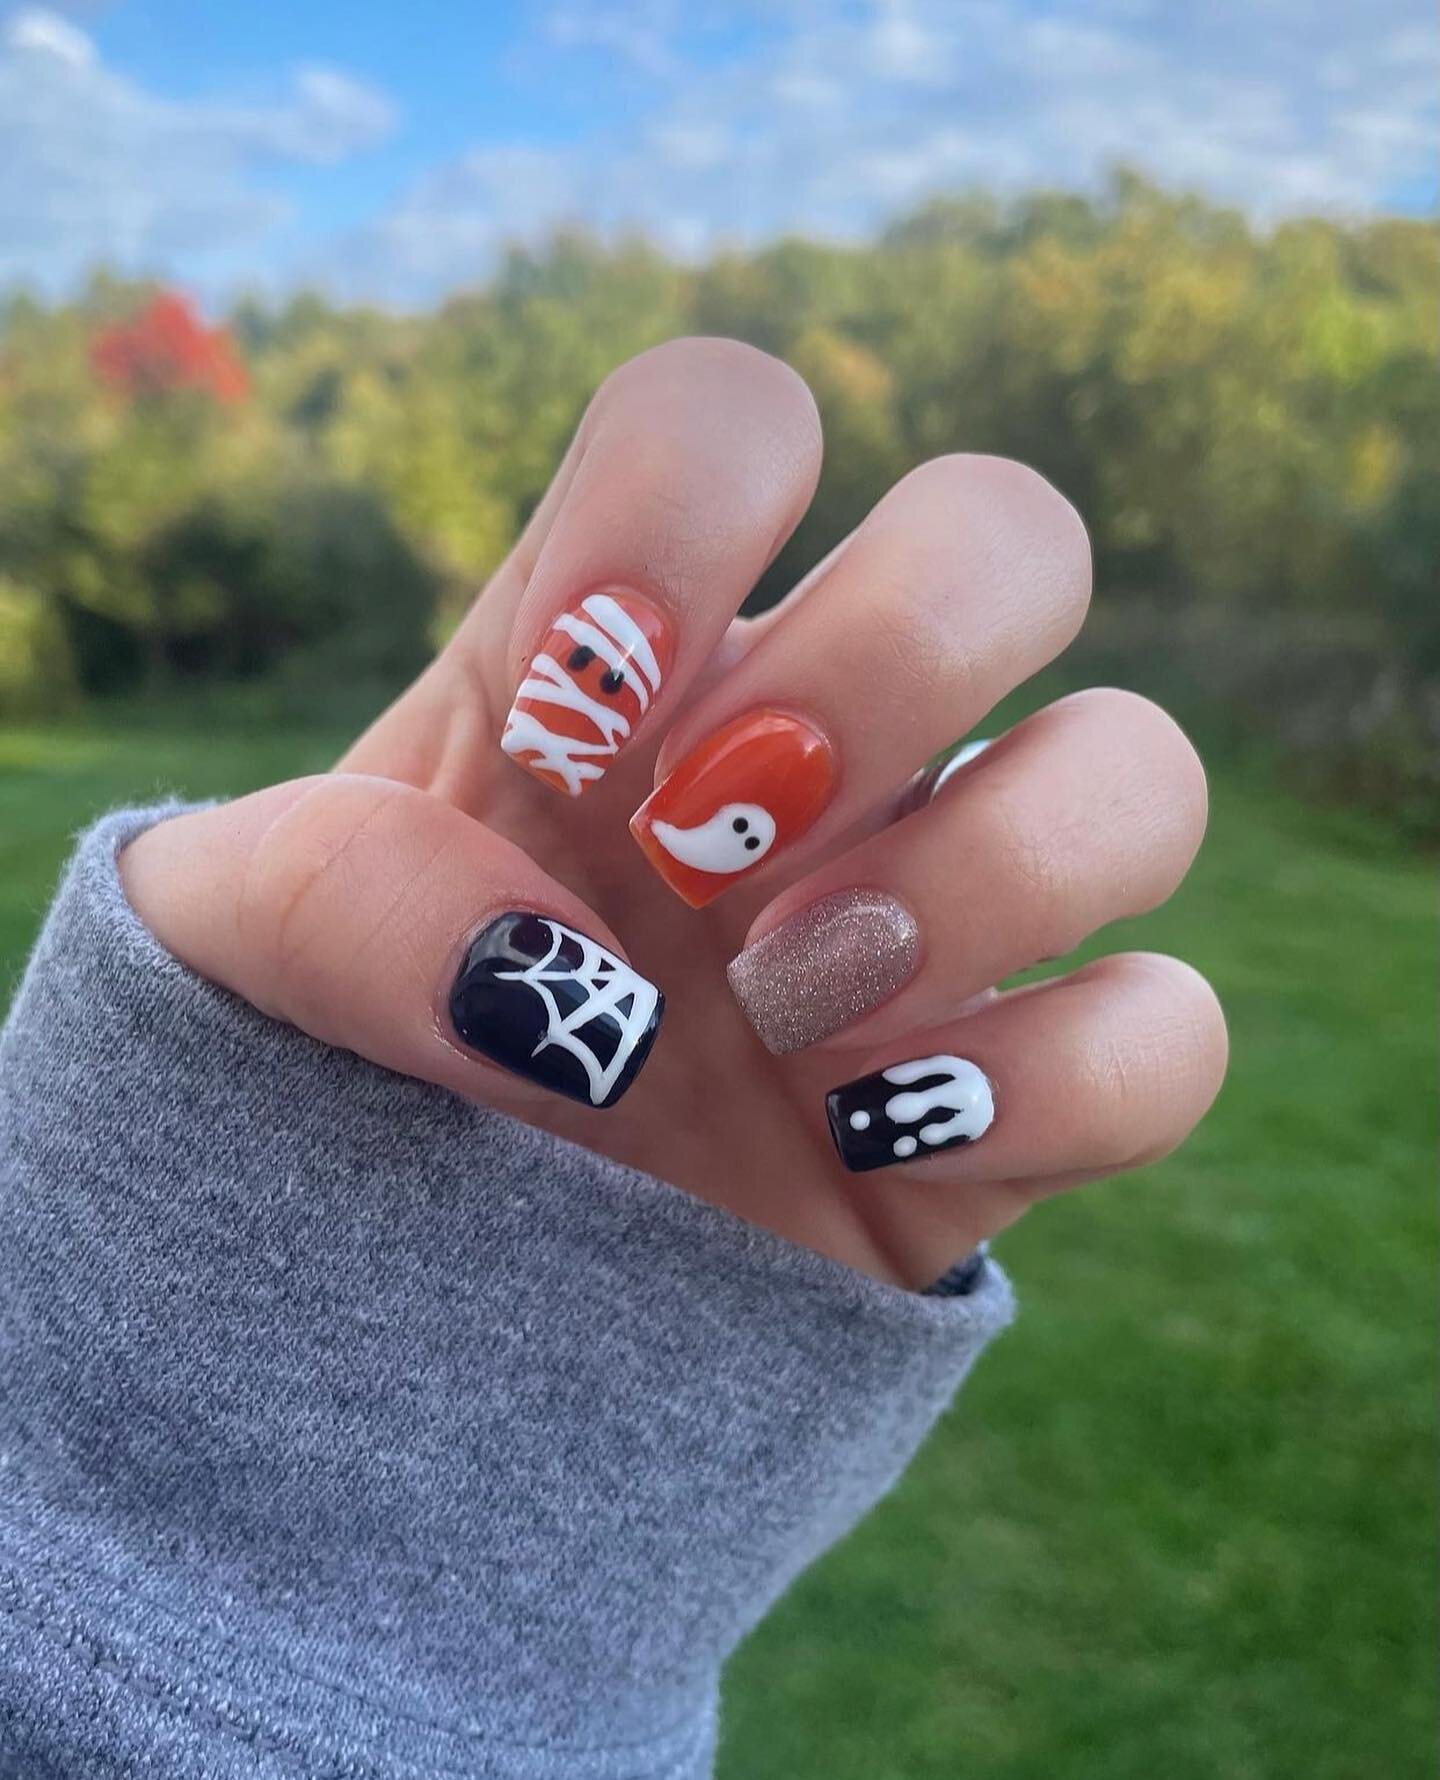 A SPoOoOoOoky manicure by our newest member @styled_by_kristenmarie🧡🕷🖤
&bull;
&bull;
Book her in our shop on Wednesdays and Thursdays and get your spook on🎃
&bull;
&bull;
#hudsonvalley #hudsonvalleyny #nailsofinstagram #nails #nailart #halloweenn